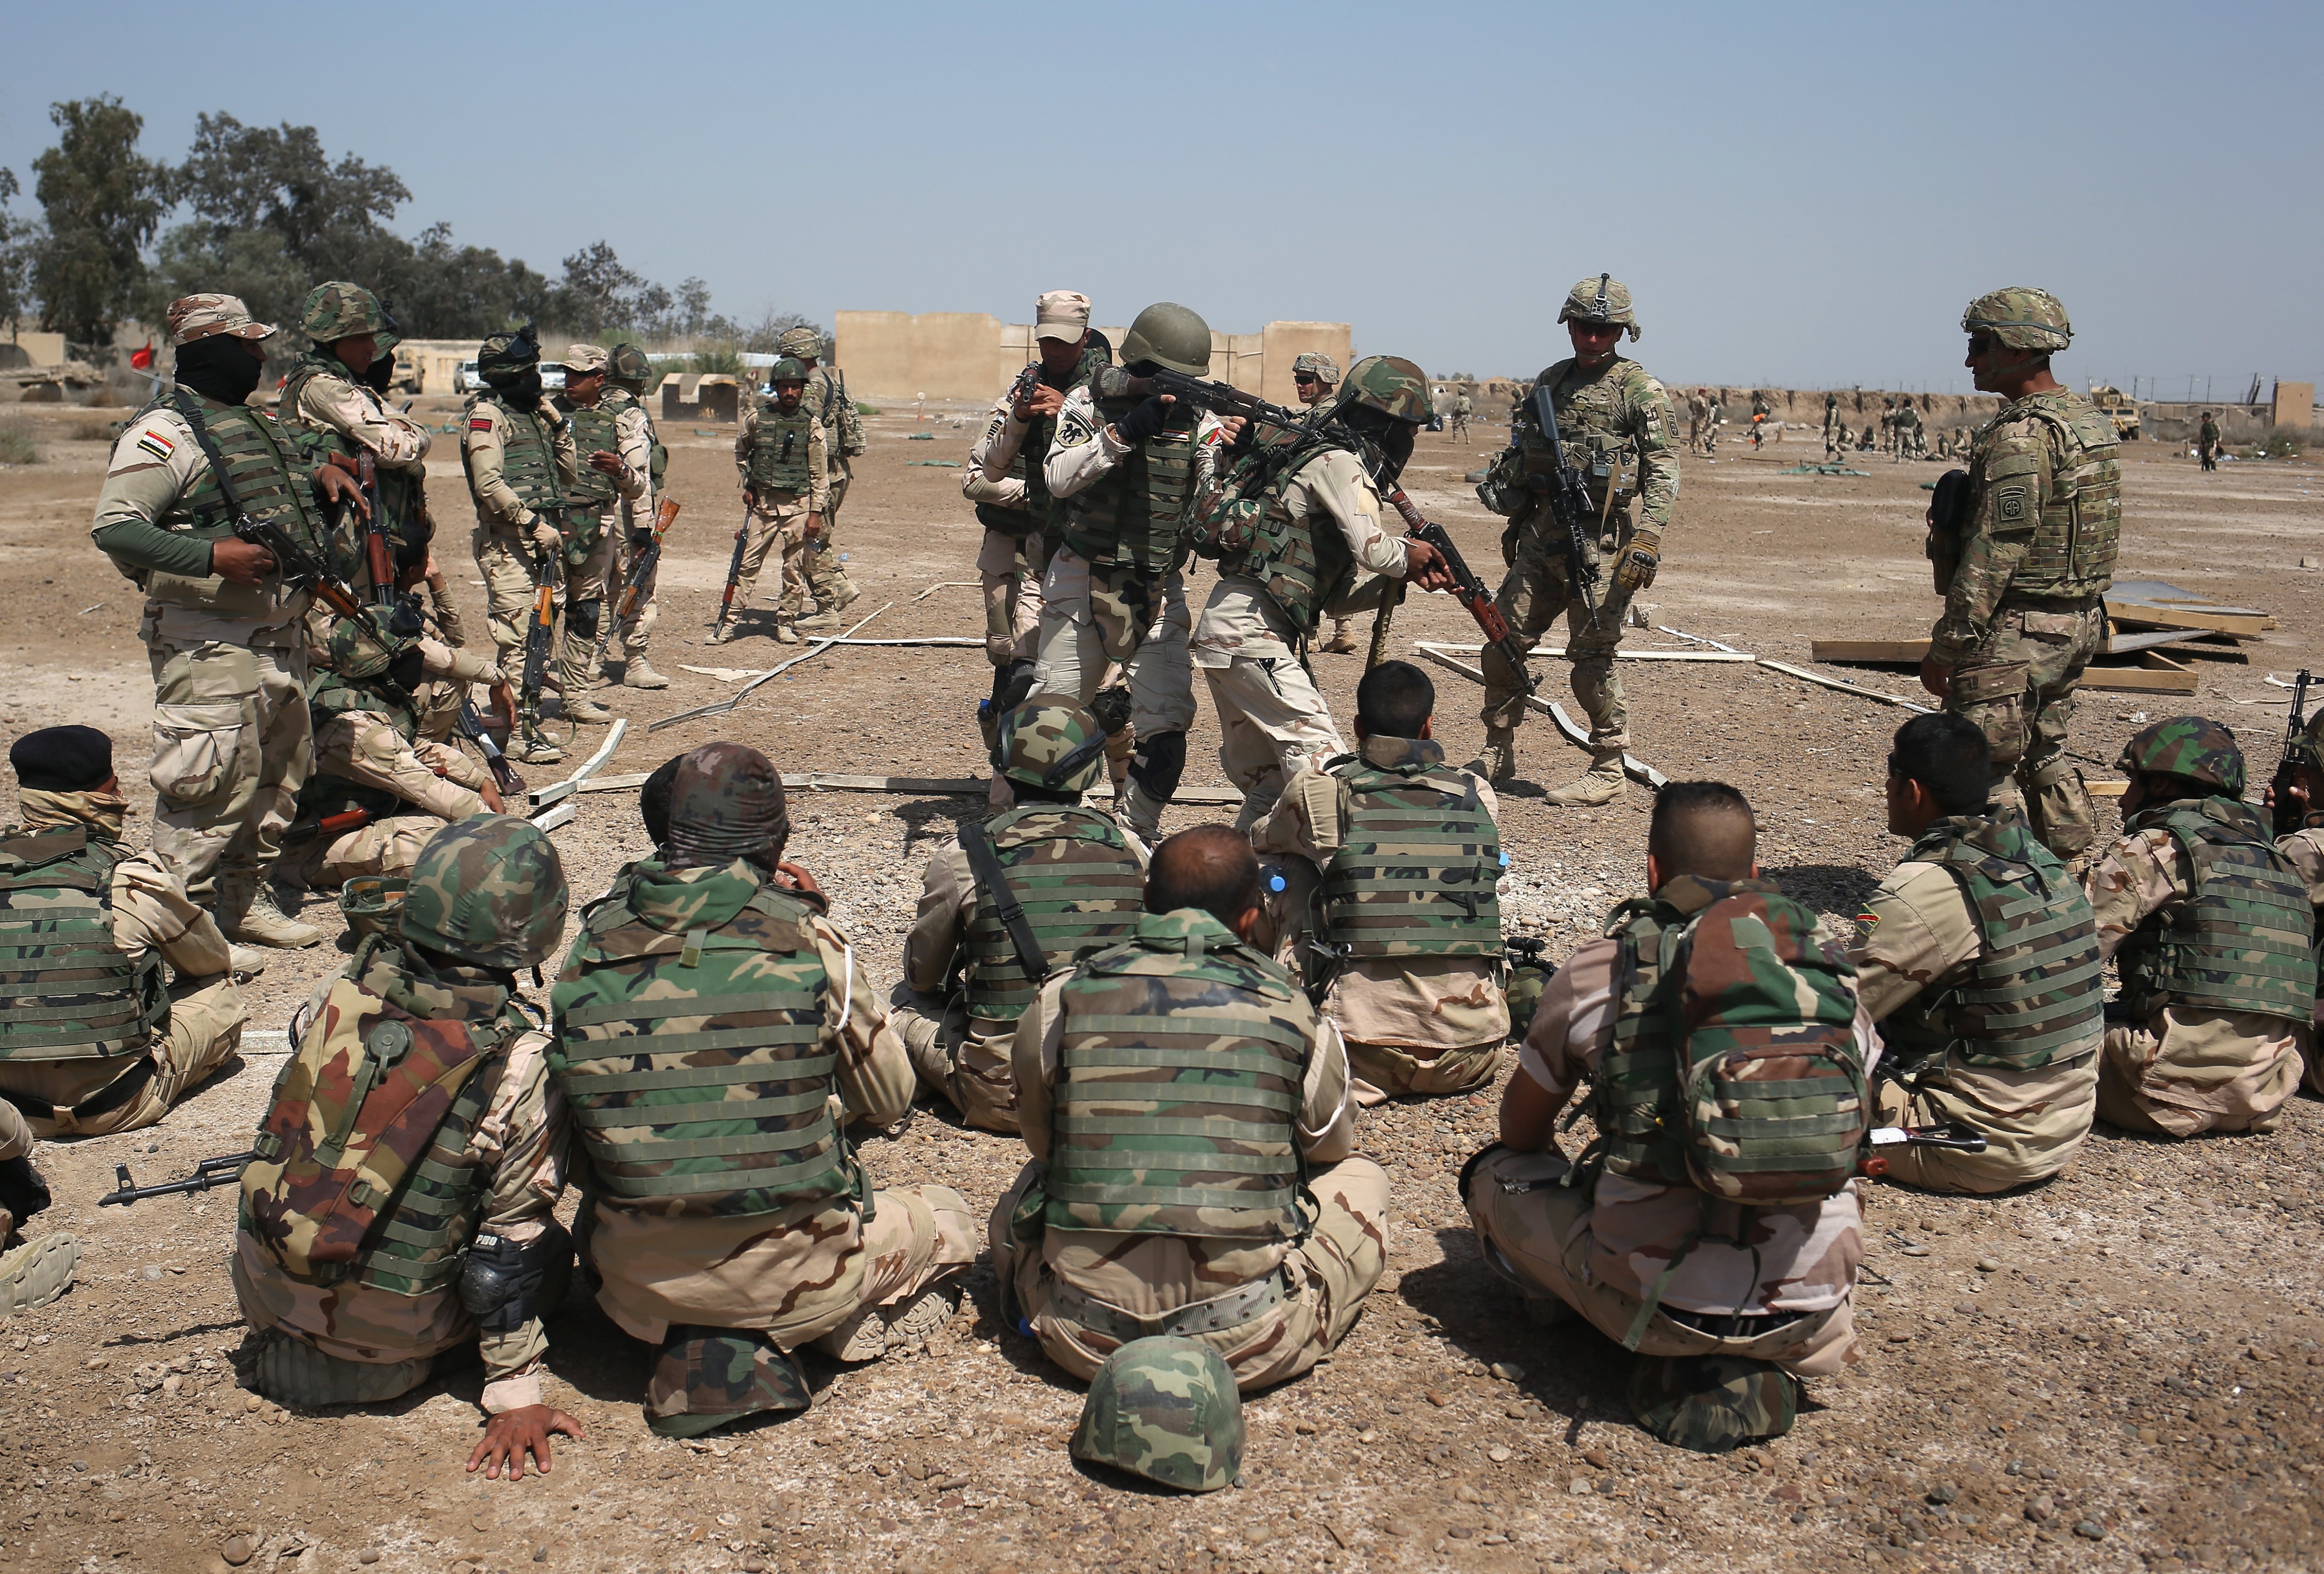 U.S. Army soldiers train Iraqi troops in April. (John Moore / Getty Images)